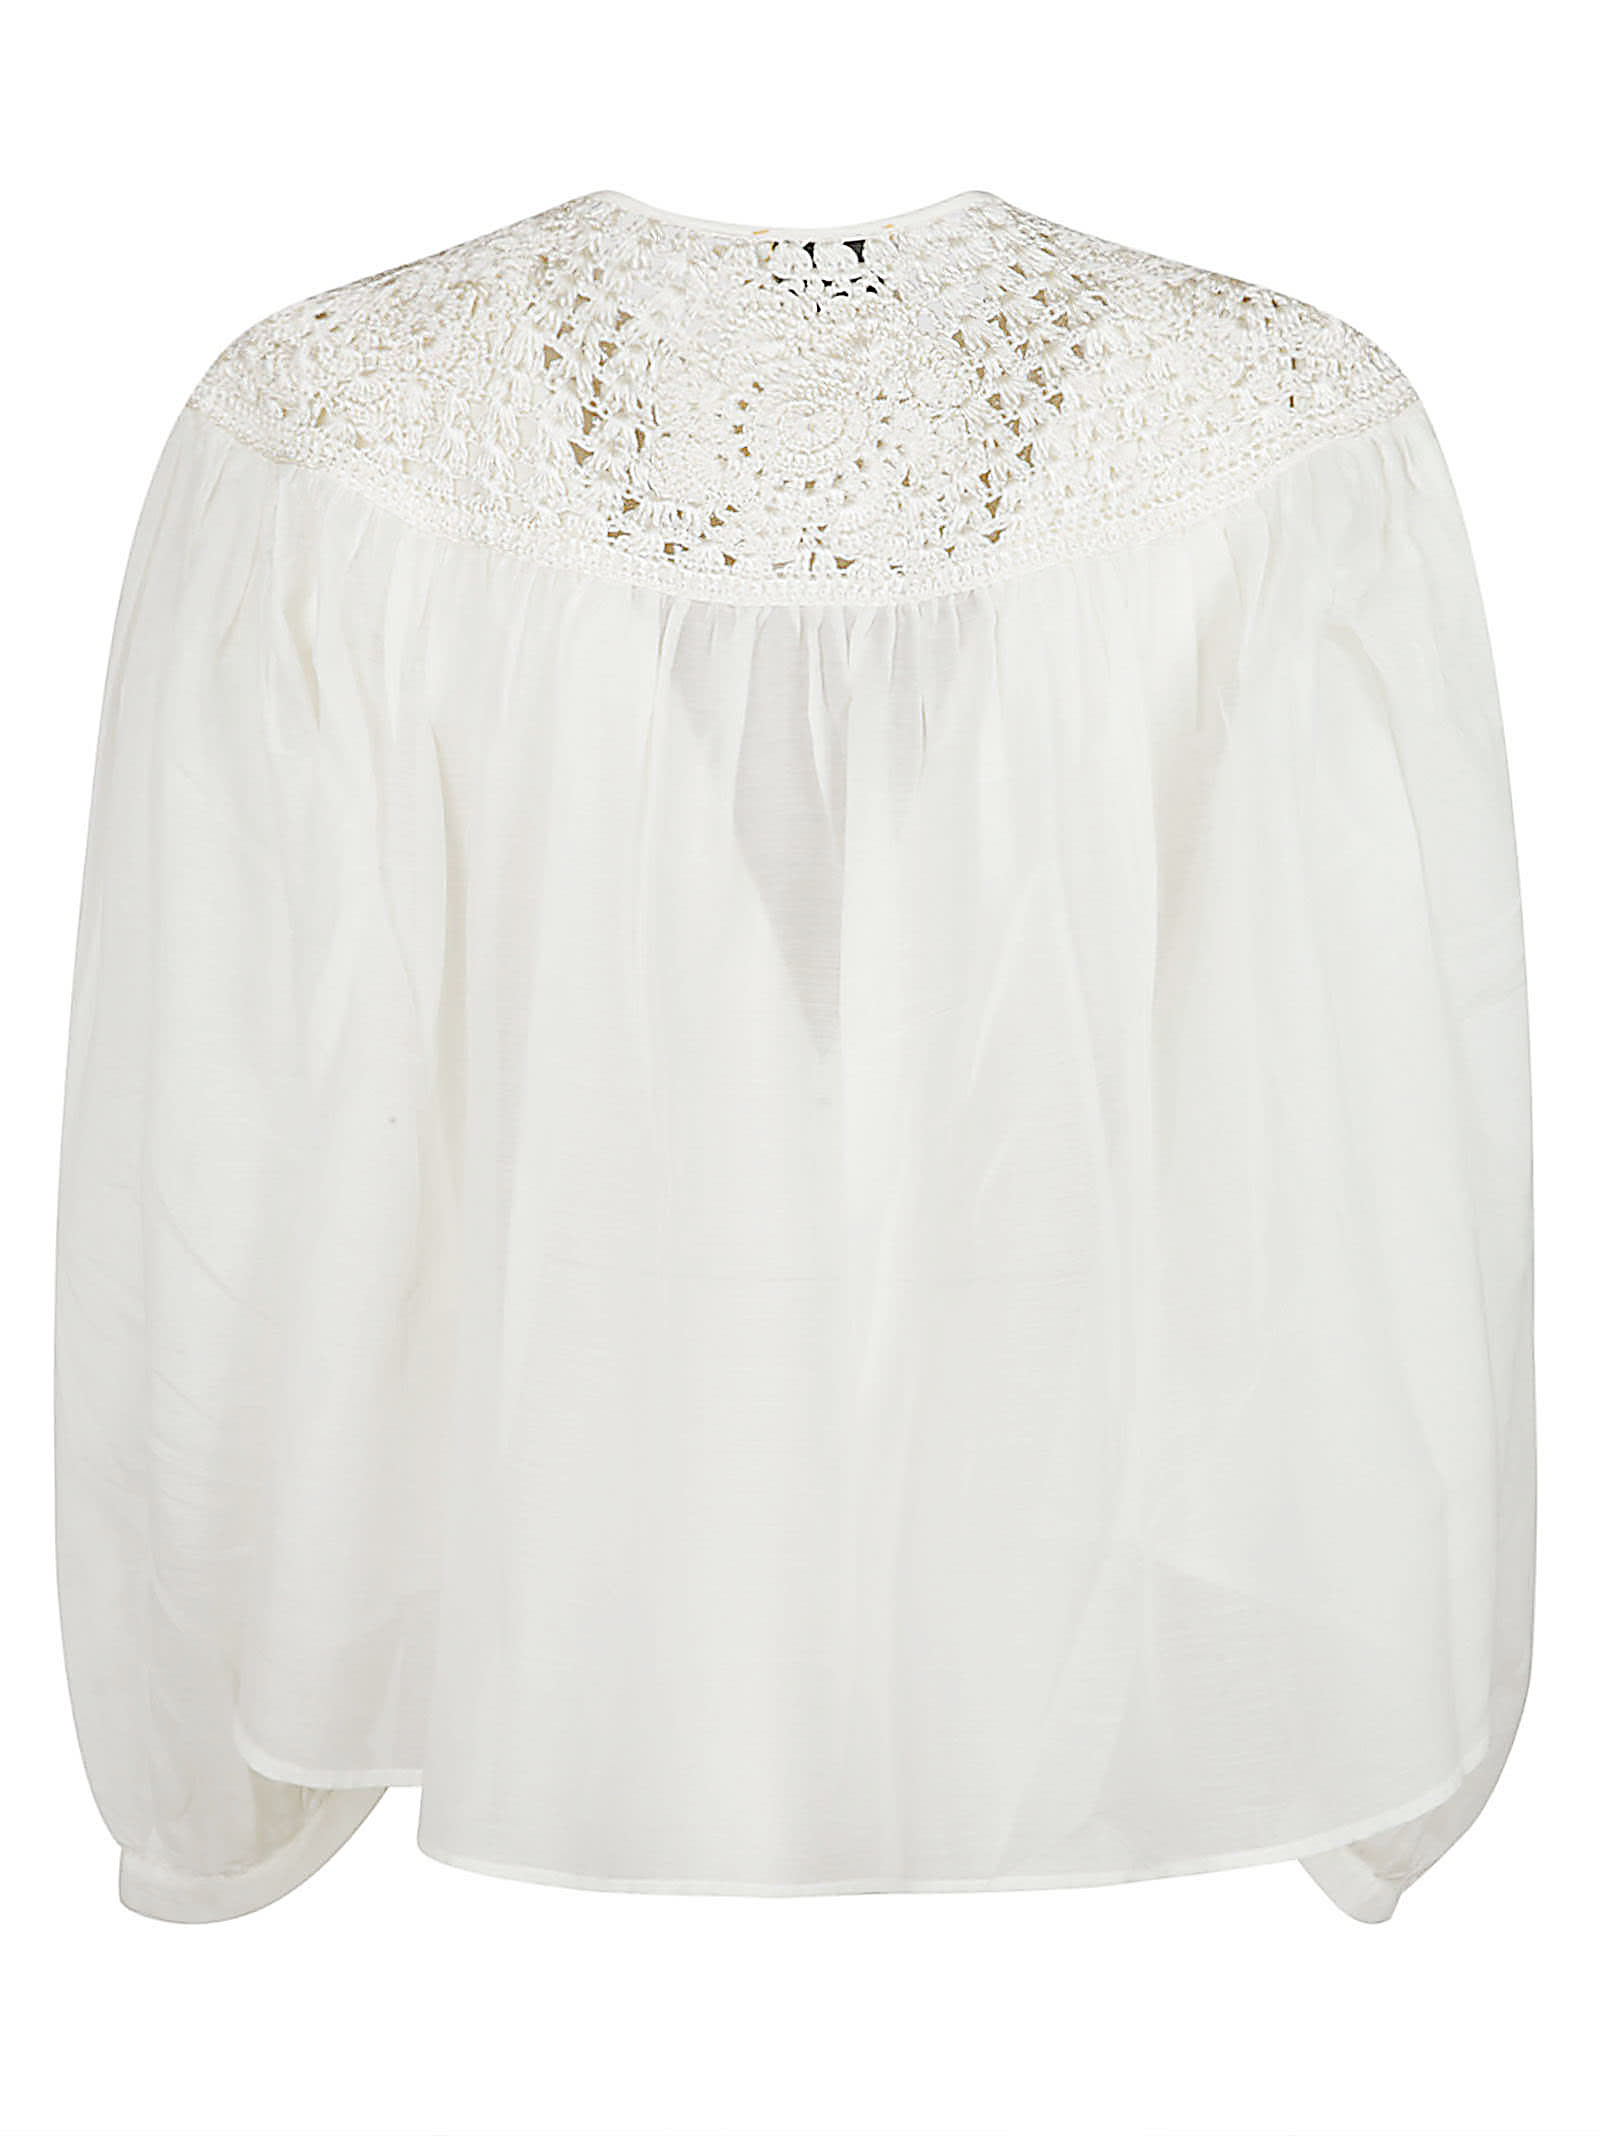 Shop Forte Forte Perforated Paneled Long-sleeved Blouse In Avorio